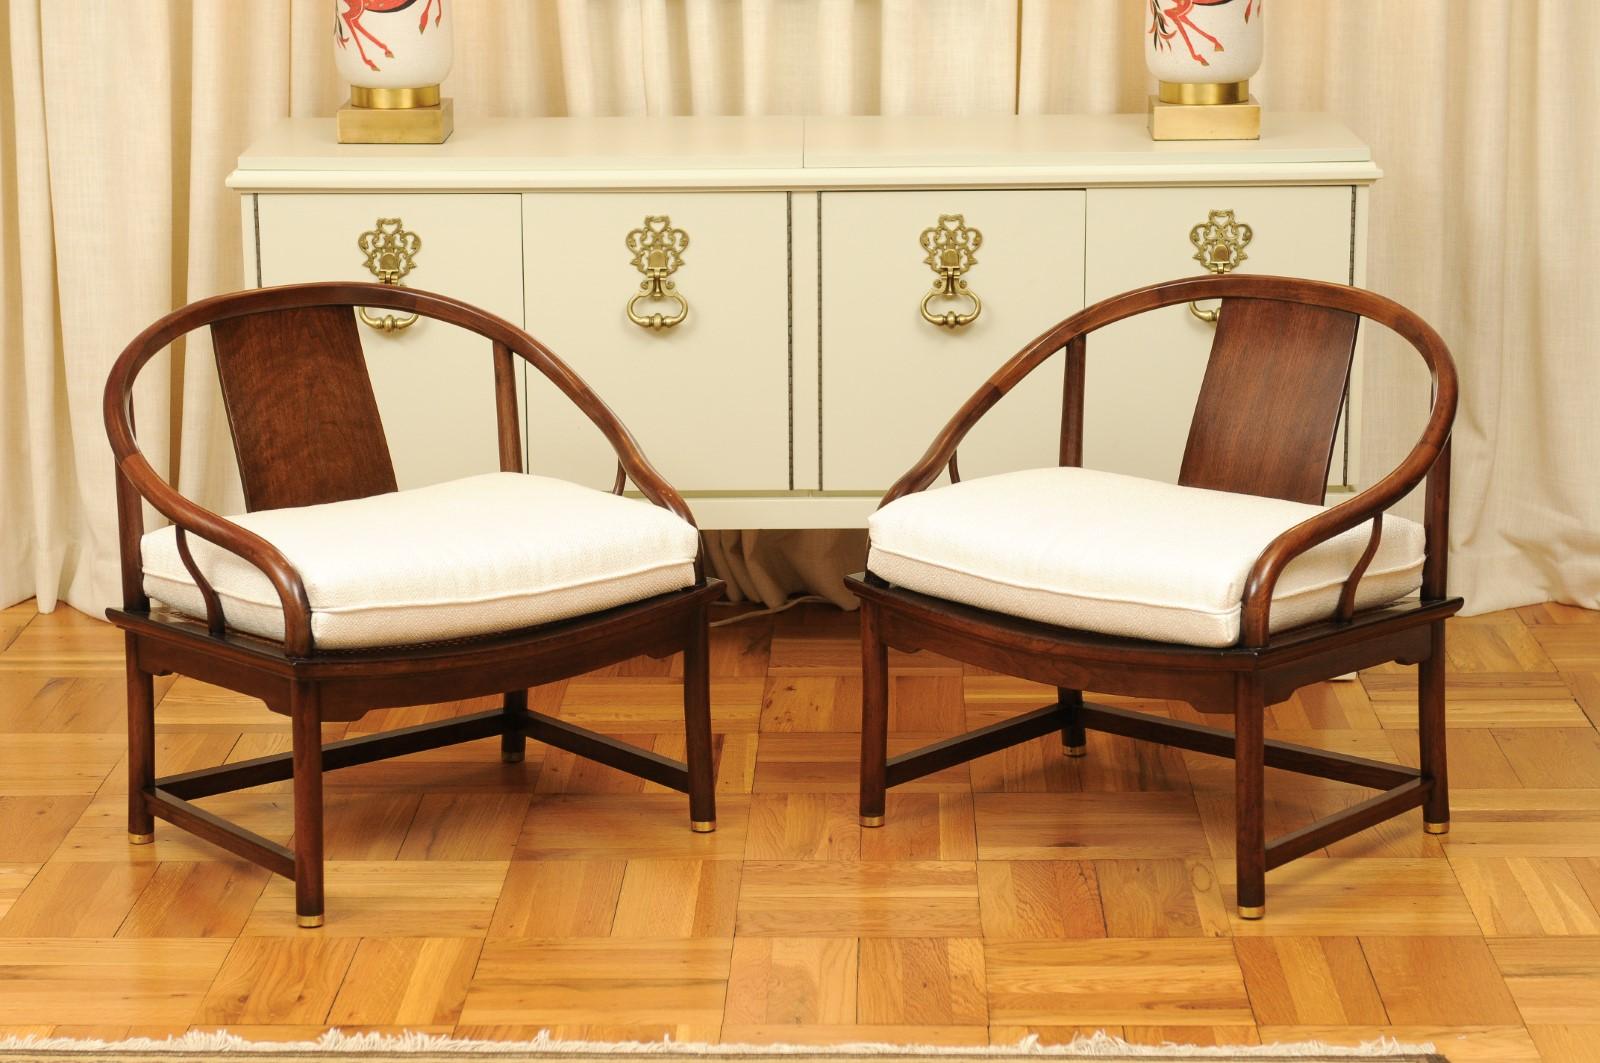 These magnificent lounge chairs are shipped as professionally photographed and described in the listing narrative: Meticulously professionally restored and installation ready. Expert custom upholstery service is available.

A magnificent